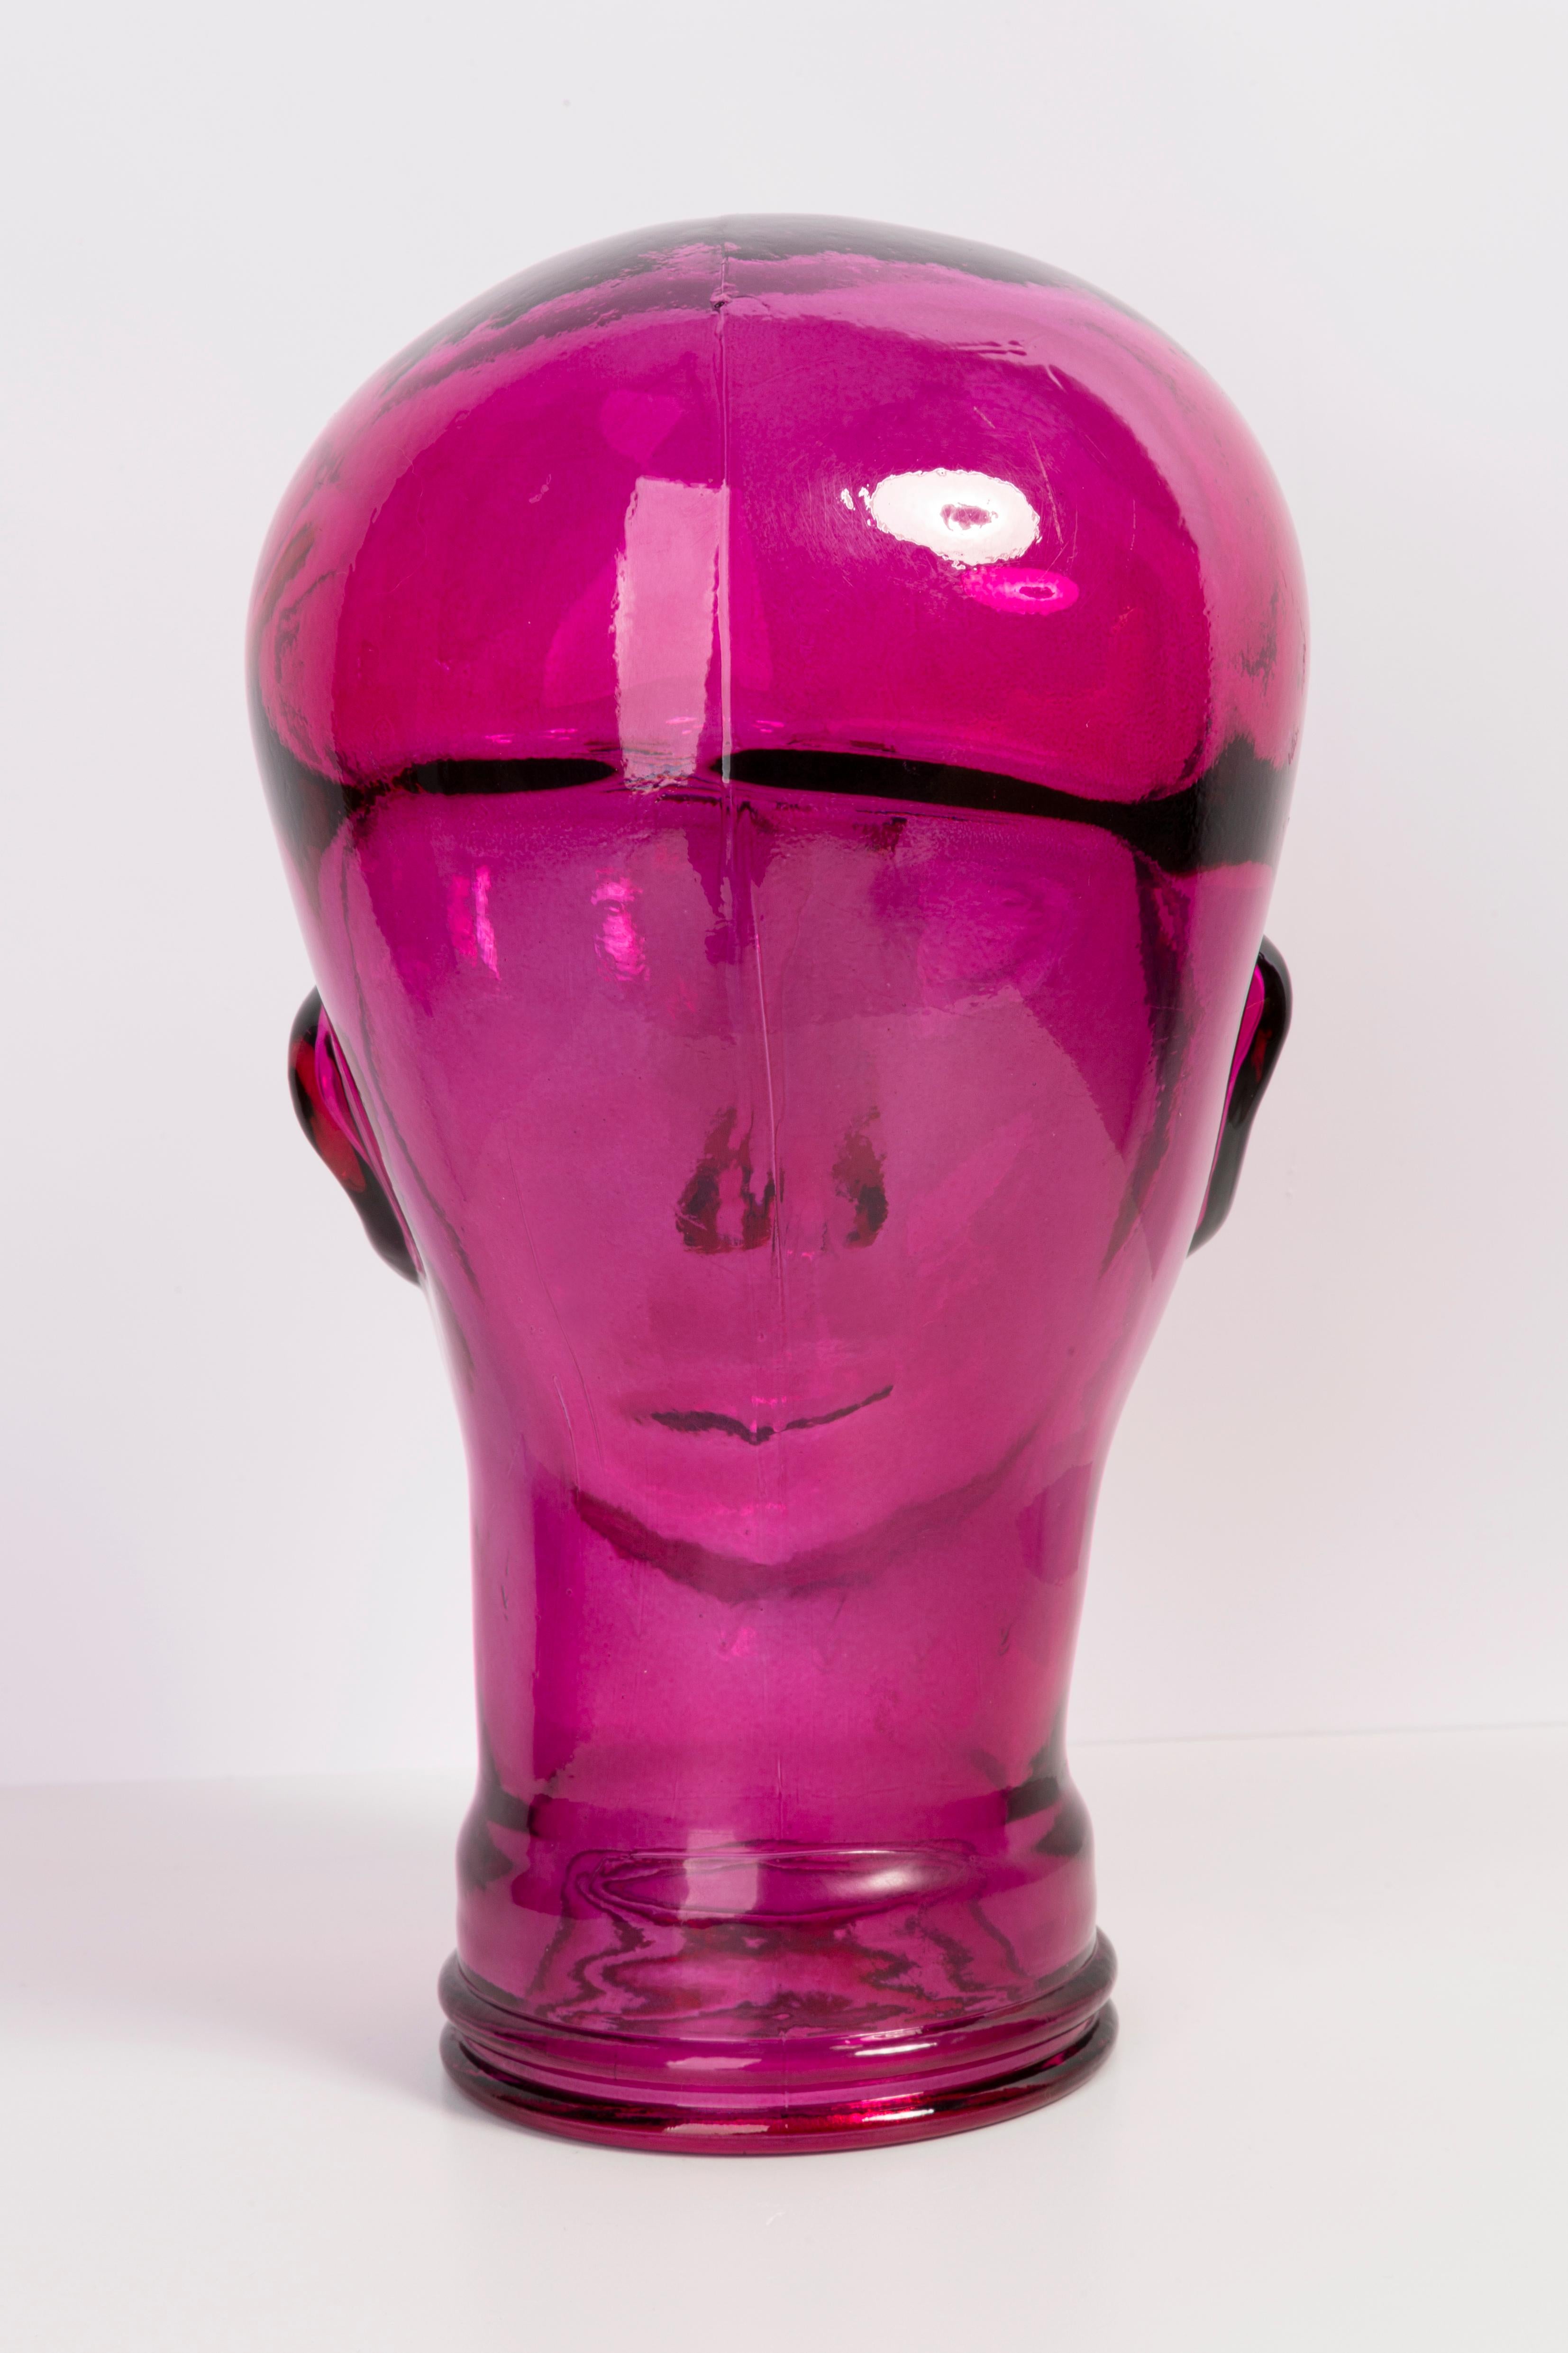 Mid-Century Modern Pink Vintage Decorative Mannequin Glass Head Sculpture, 1970s, Germany For Sale